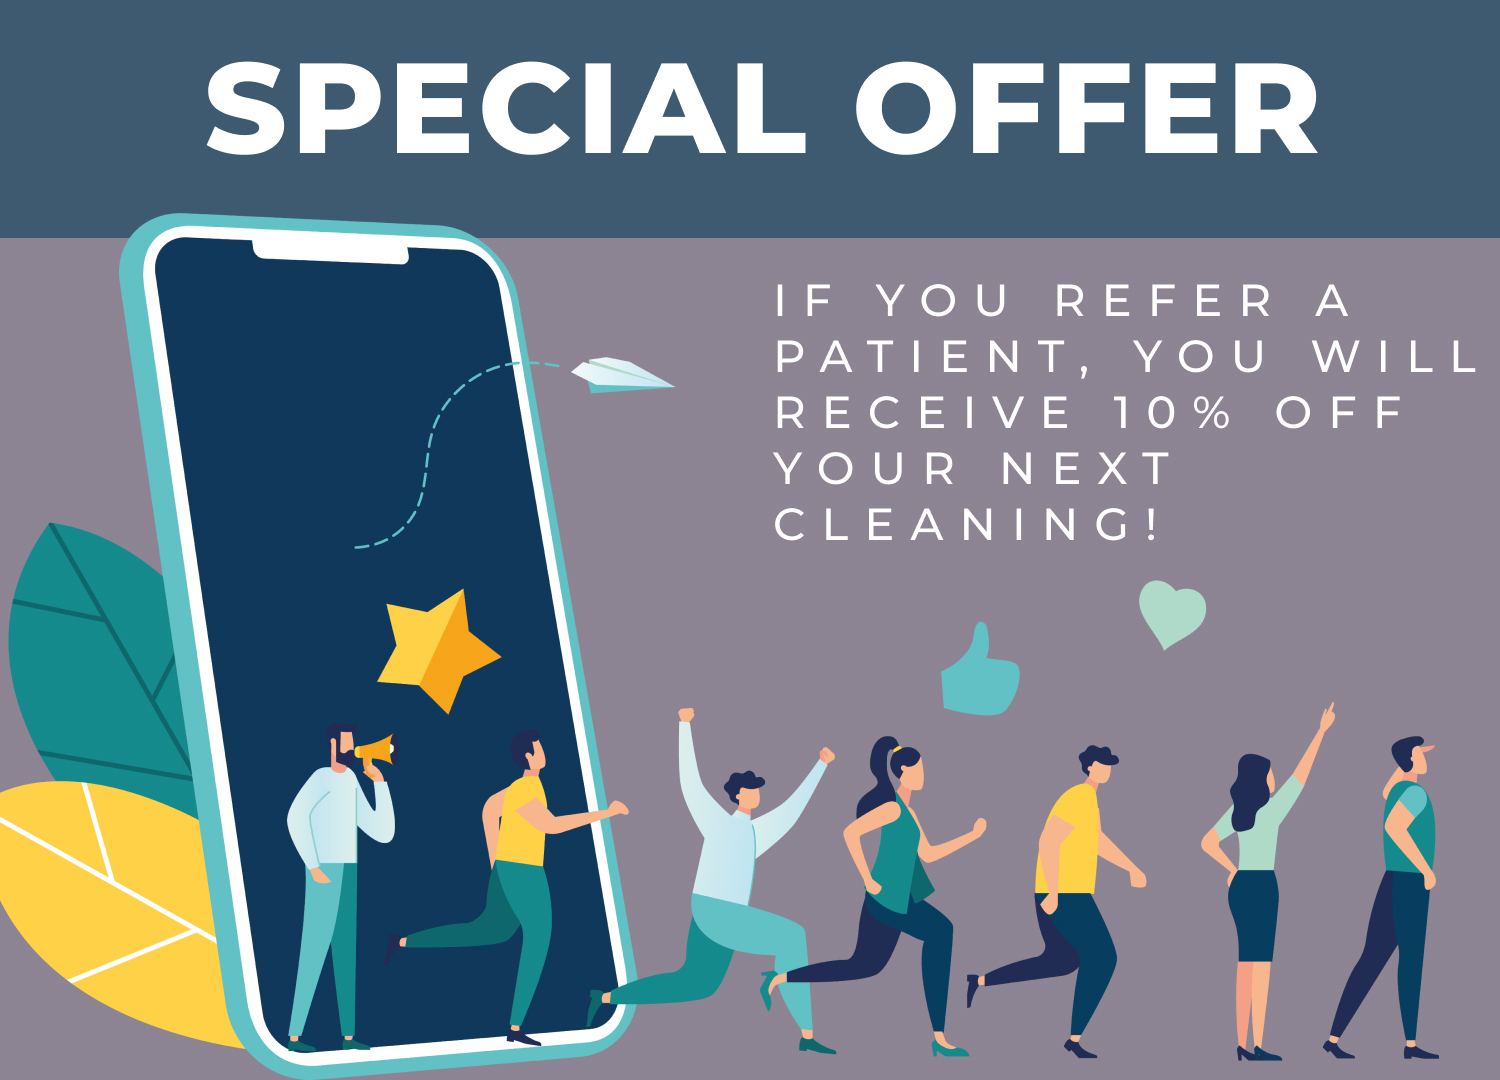 Special Offer: If you refer a patient, you will receive 10% off your next cleaning!